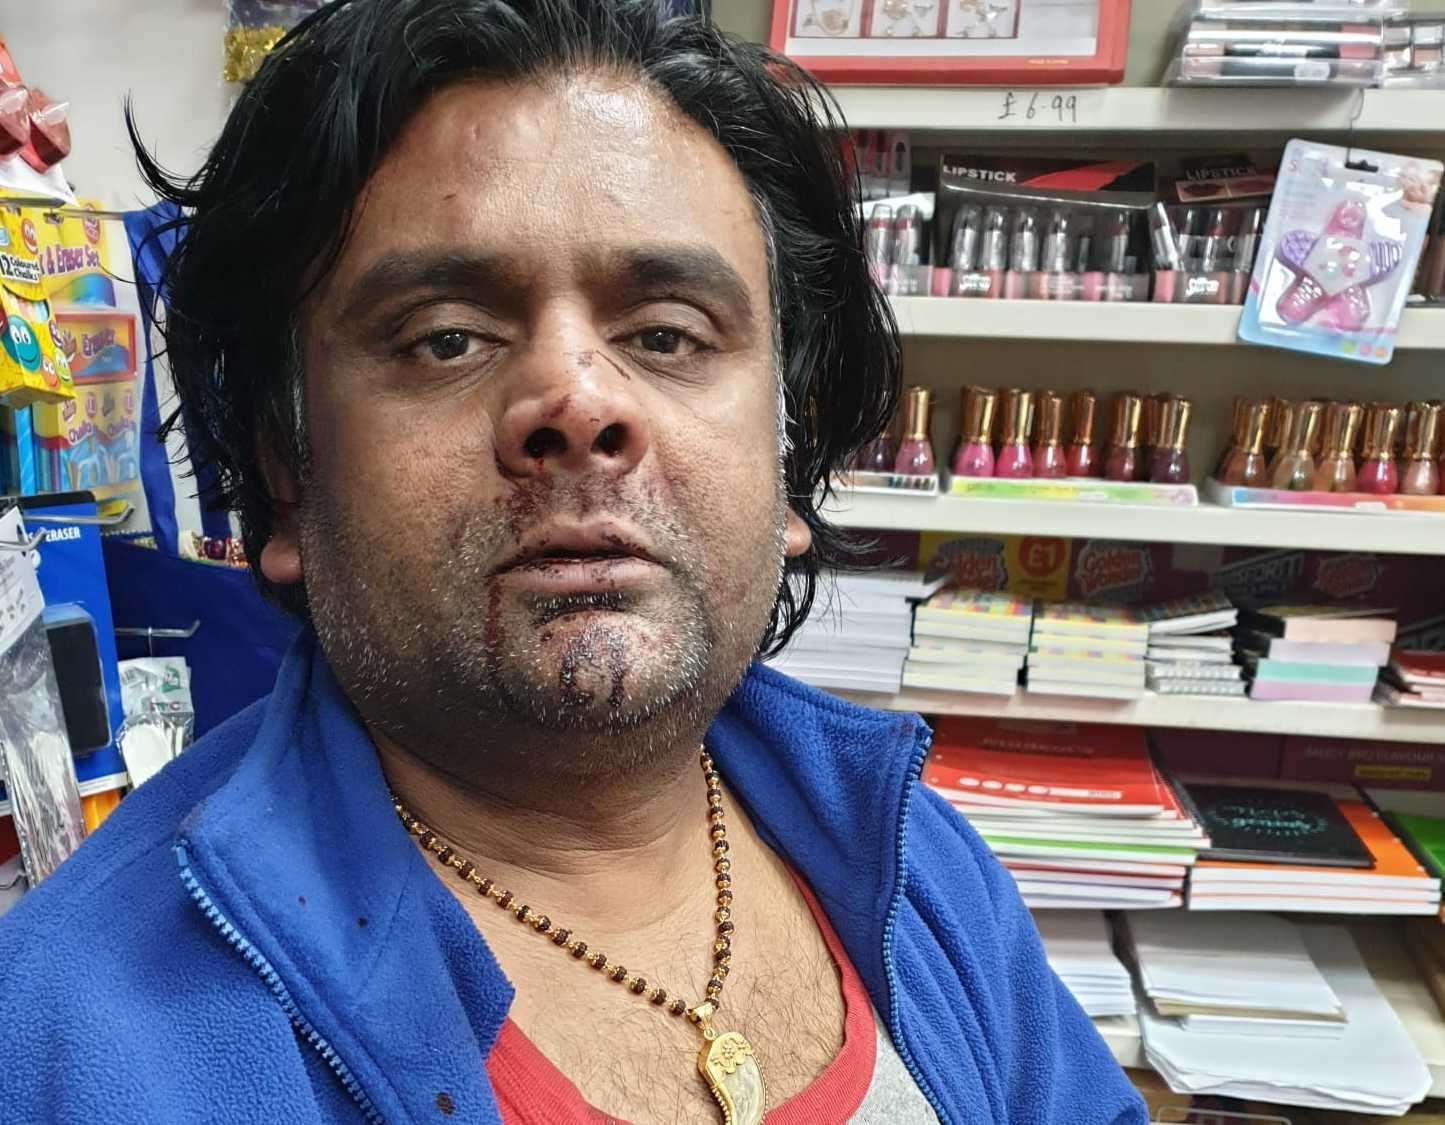 Umesh Patel, from M&P News in Shepway, Maidstone, was left bloodied and bruised after the attack. Picture: Umesh Patel